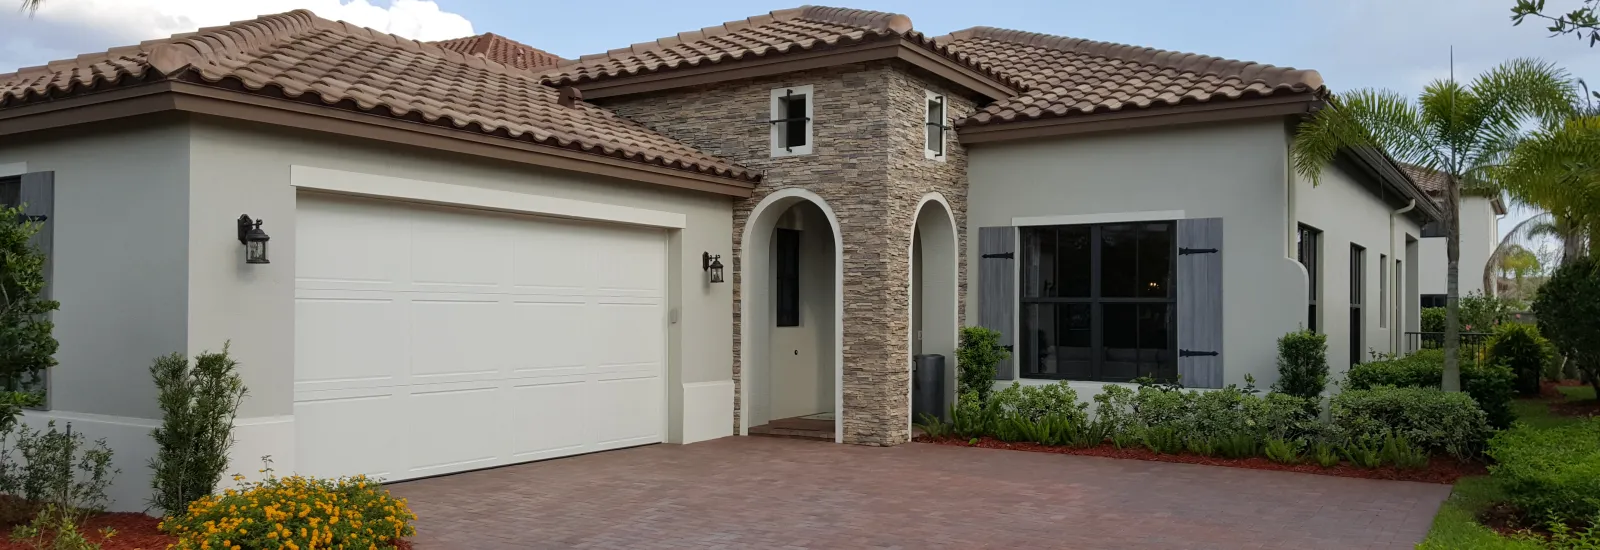 Cooper City Roofing Services